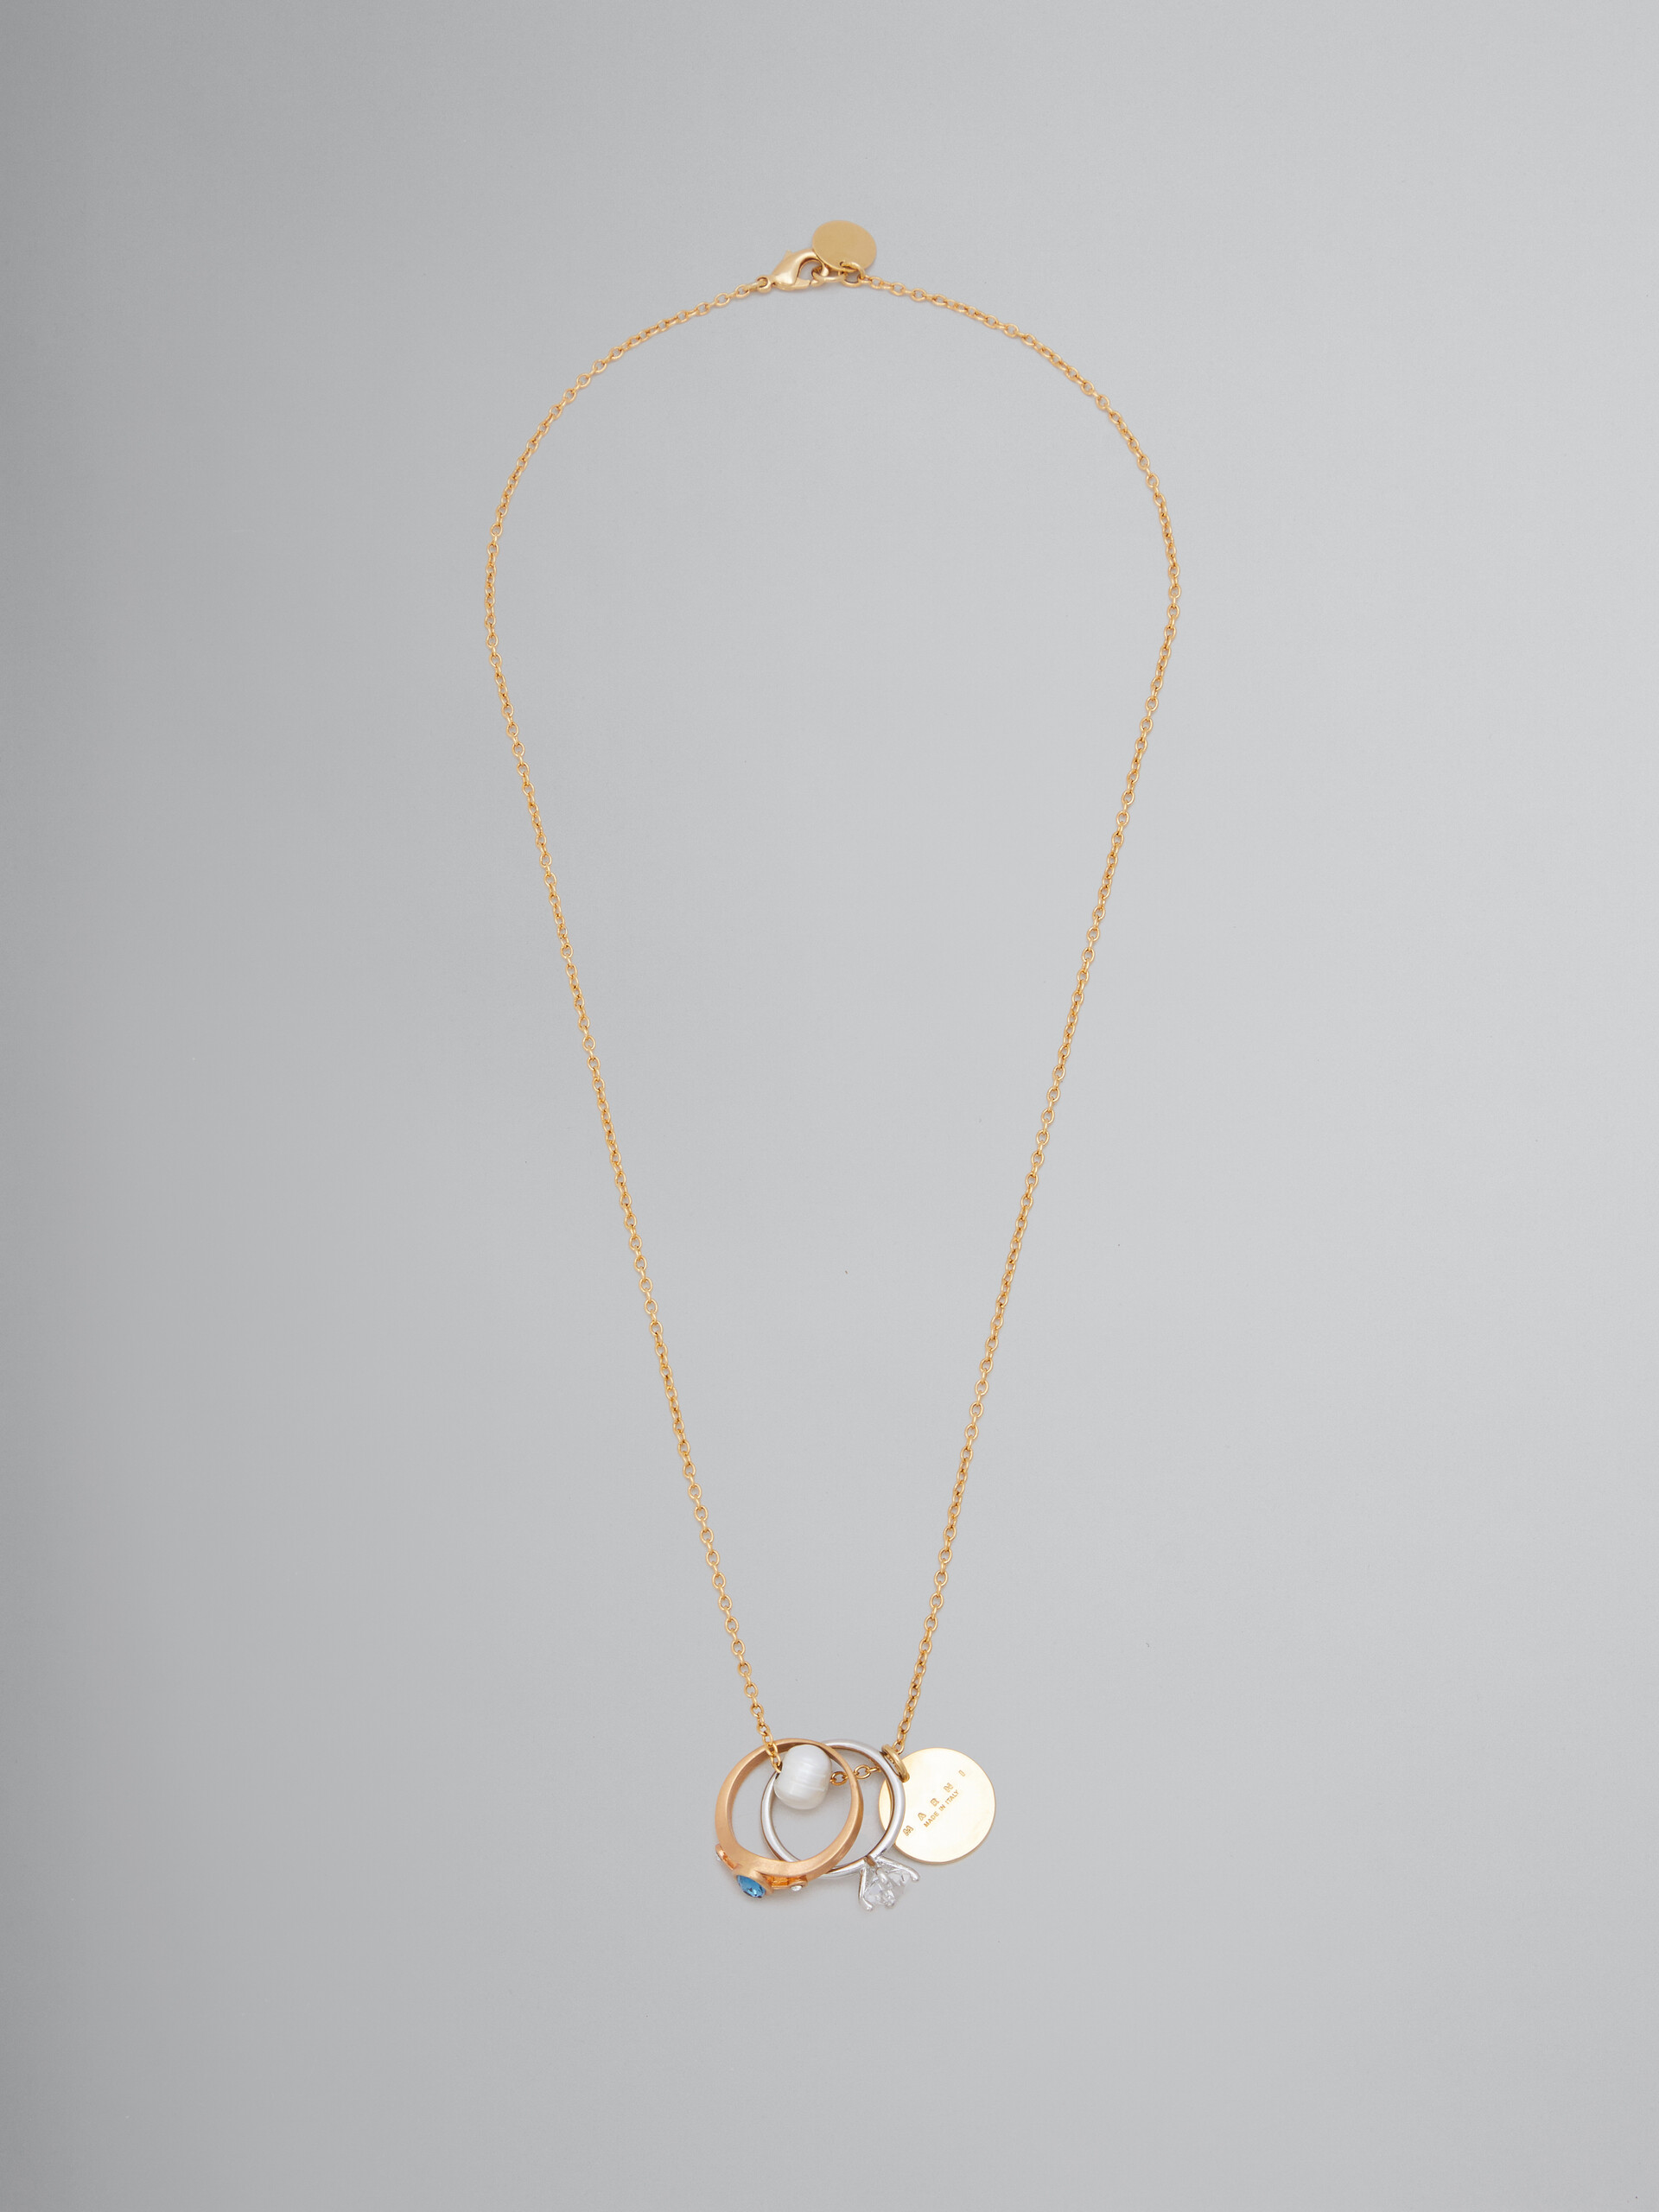 Chain necklace with pearl and ring charms - Necklaces - Image 1